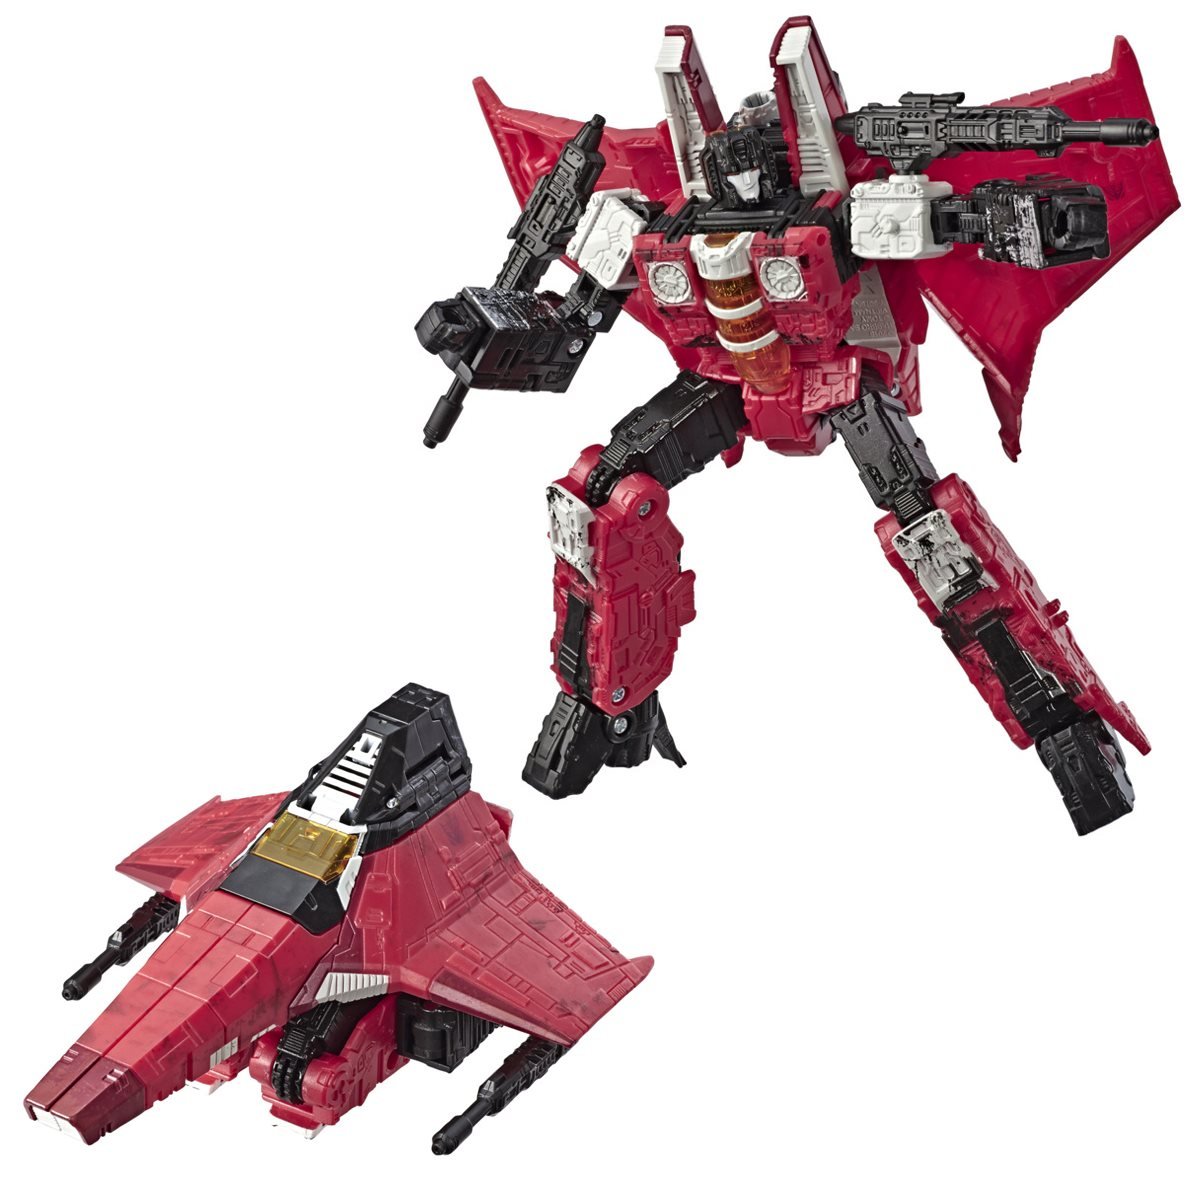 New in stock Transformers Selects War For Cybertron Voyager Red Wing 